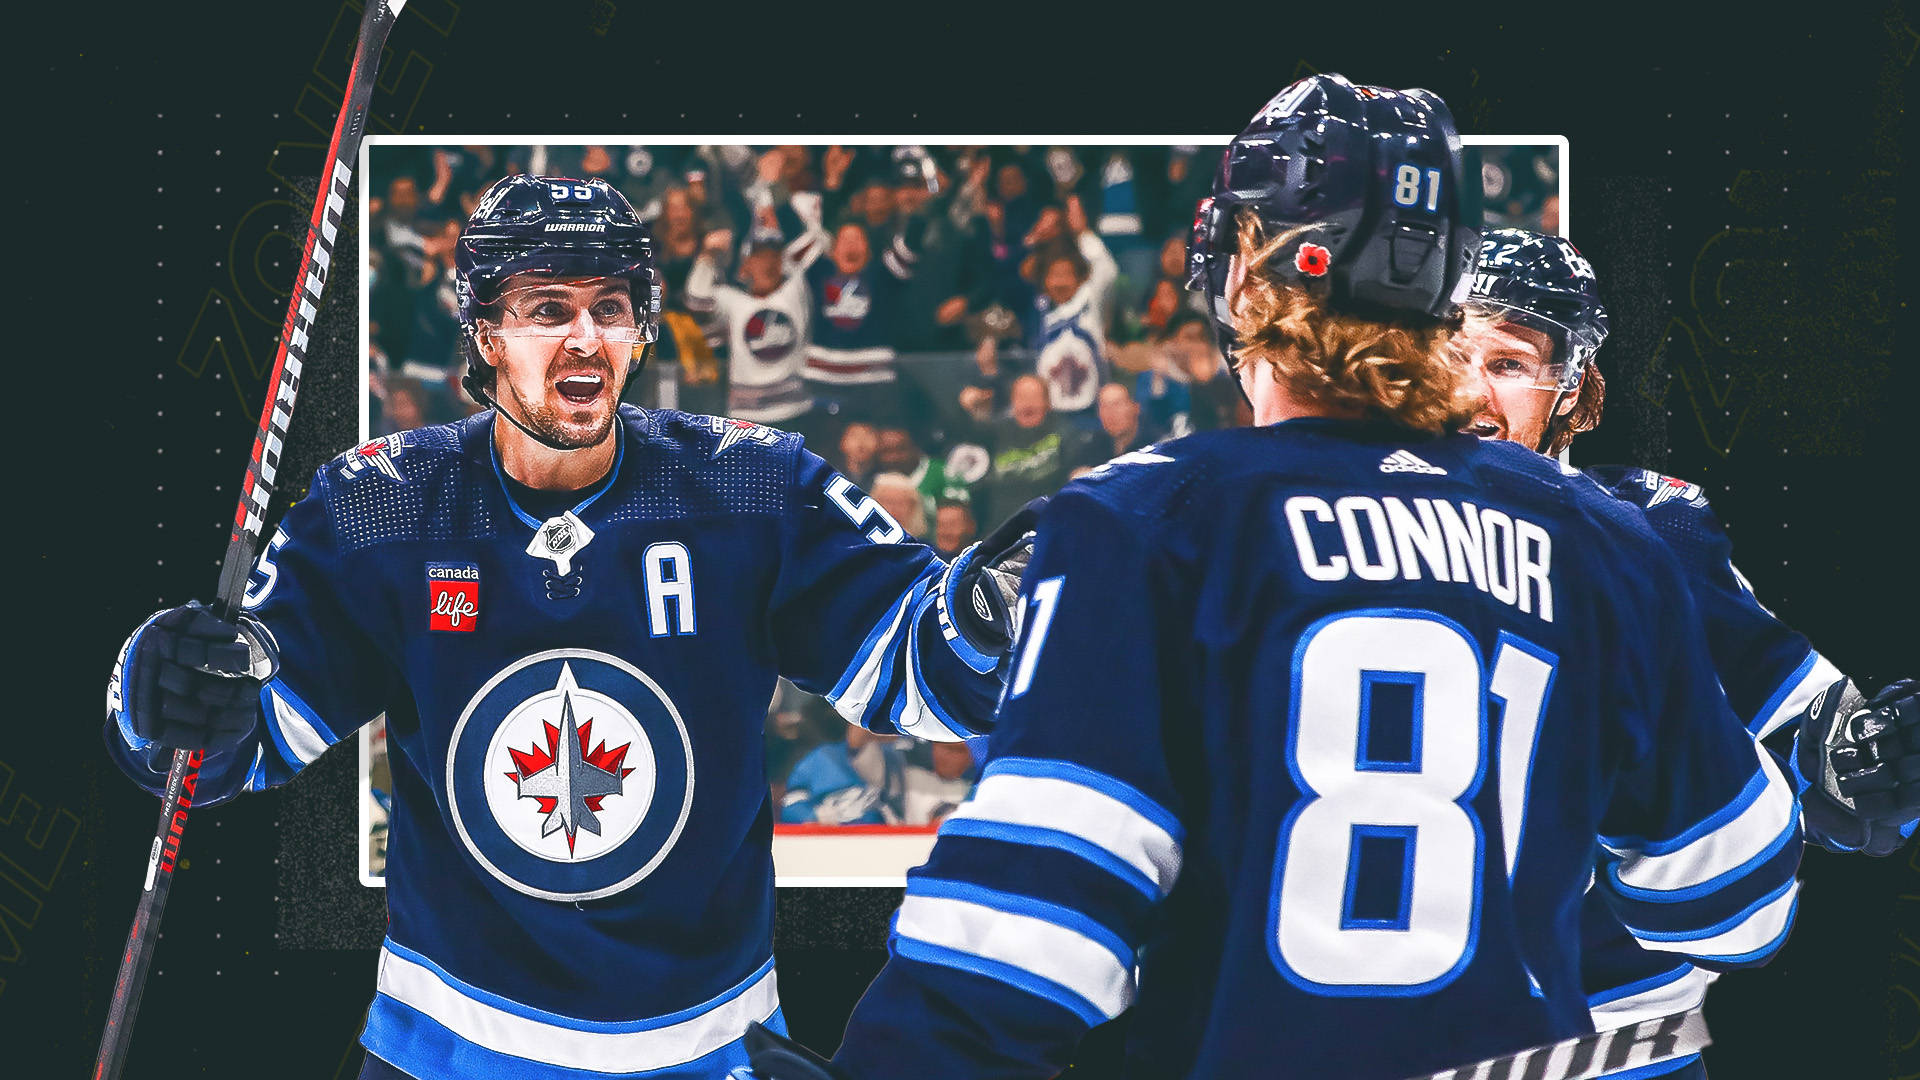 NHL Stars Kyle Connor and Mark Scheifele of the Winnipeg Jets in action. Wallpaper